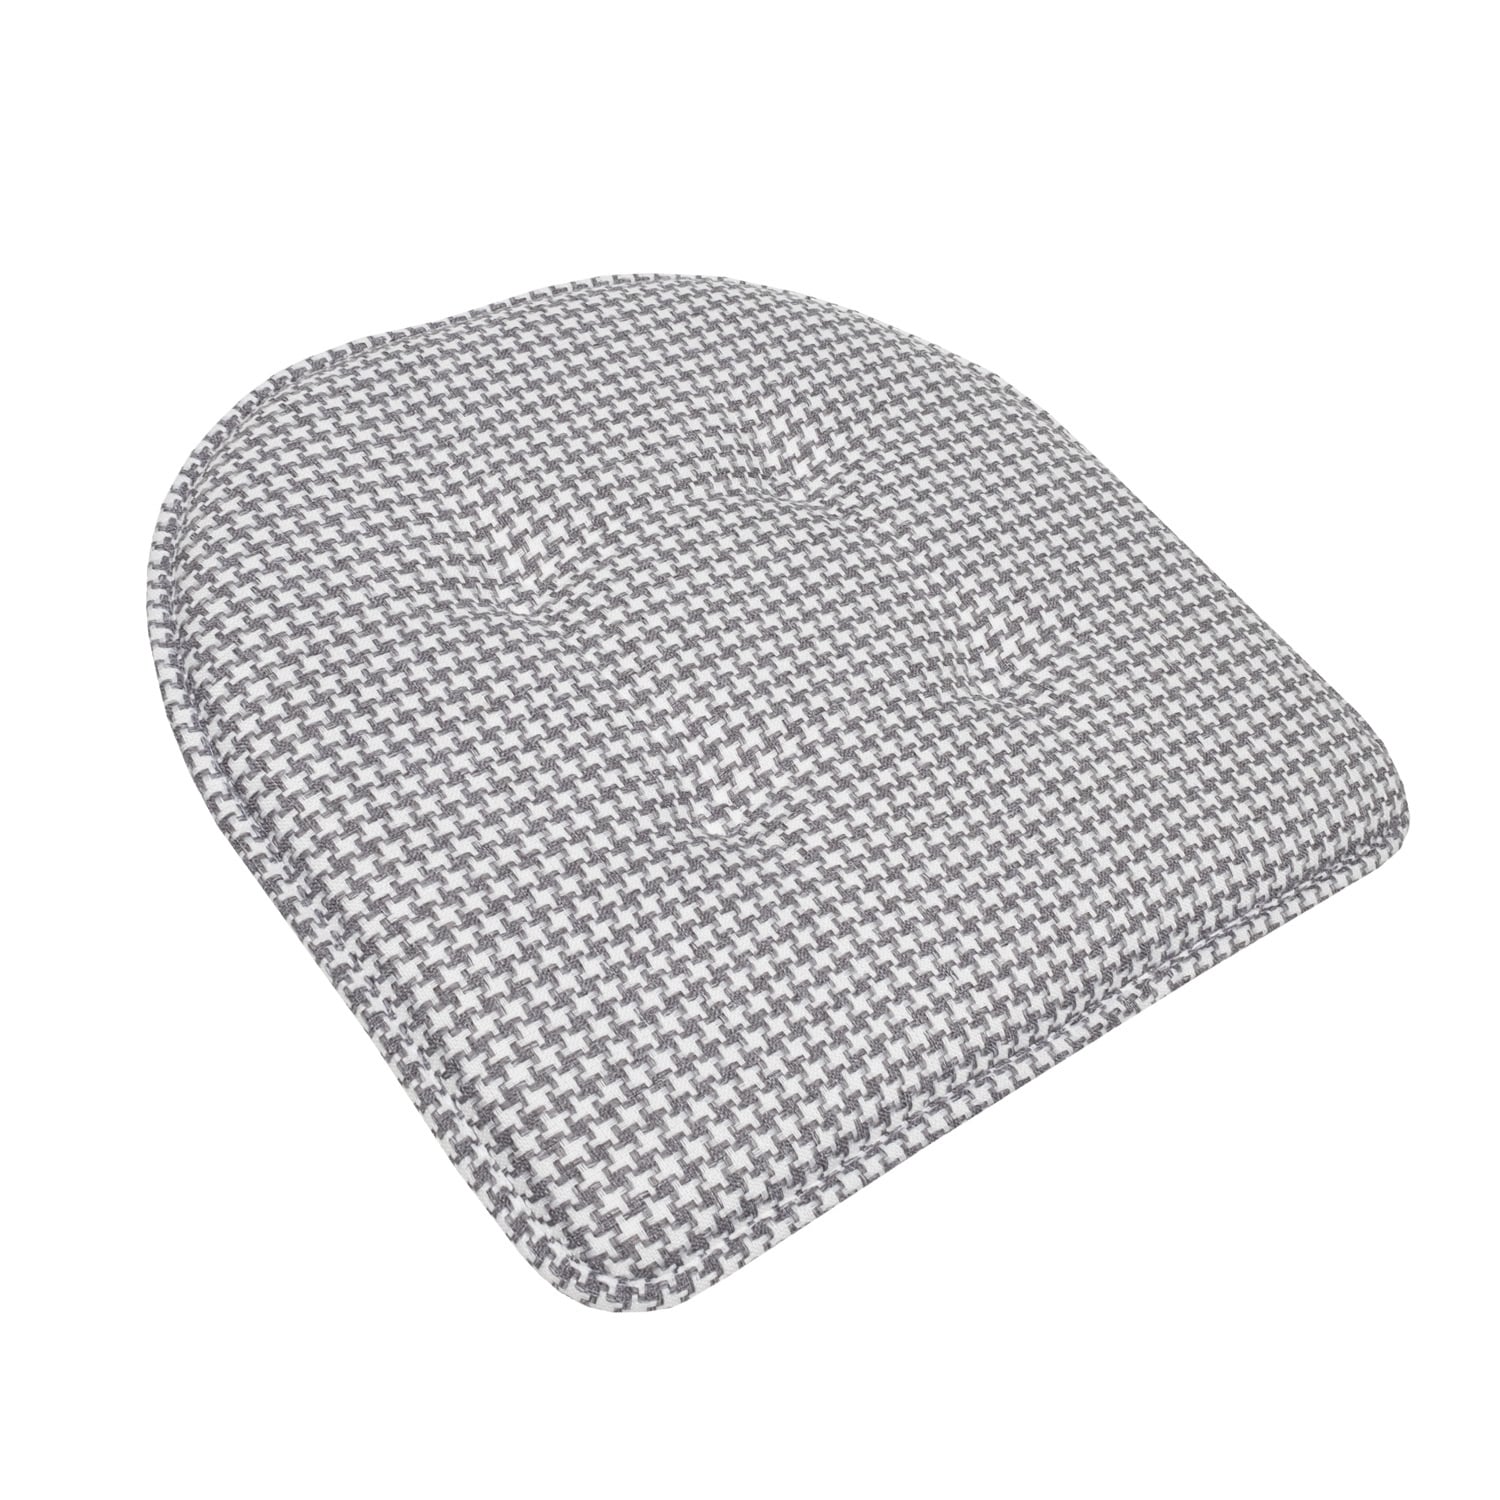 https://ak1.ostkcdn.com/images/products/is/images/direct/edea56e2763776b6d754be22a580bf67699202d2/Houndstooth-U-Shaped-16-x-17-Memory-Foam-Chair-Pad.jpg